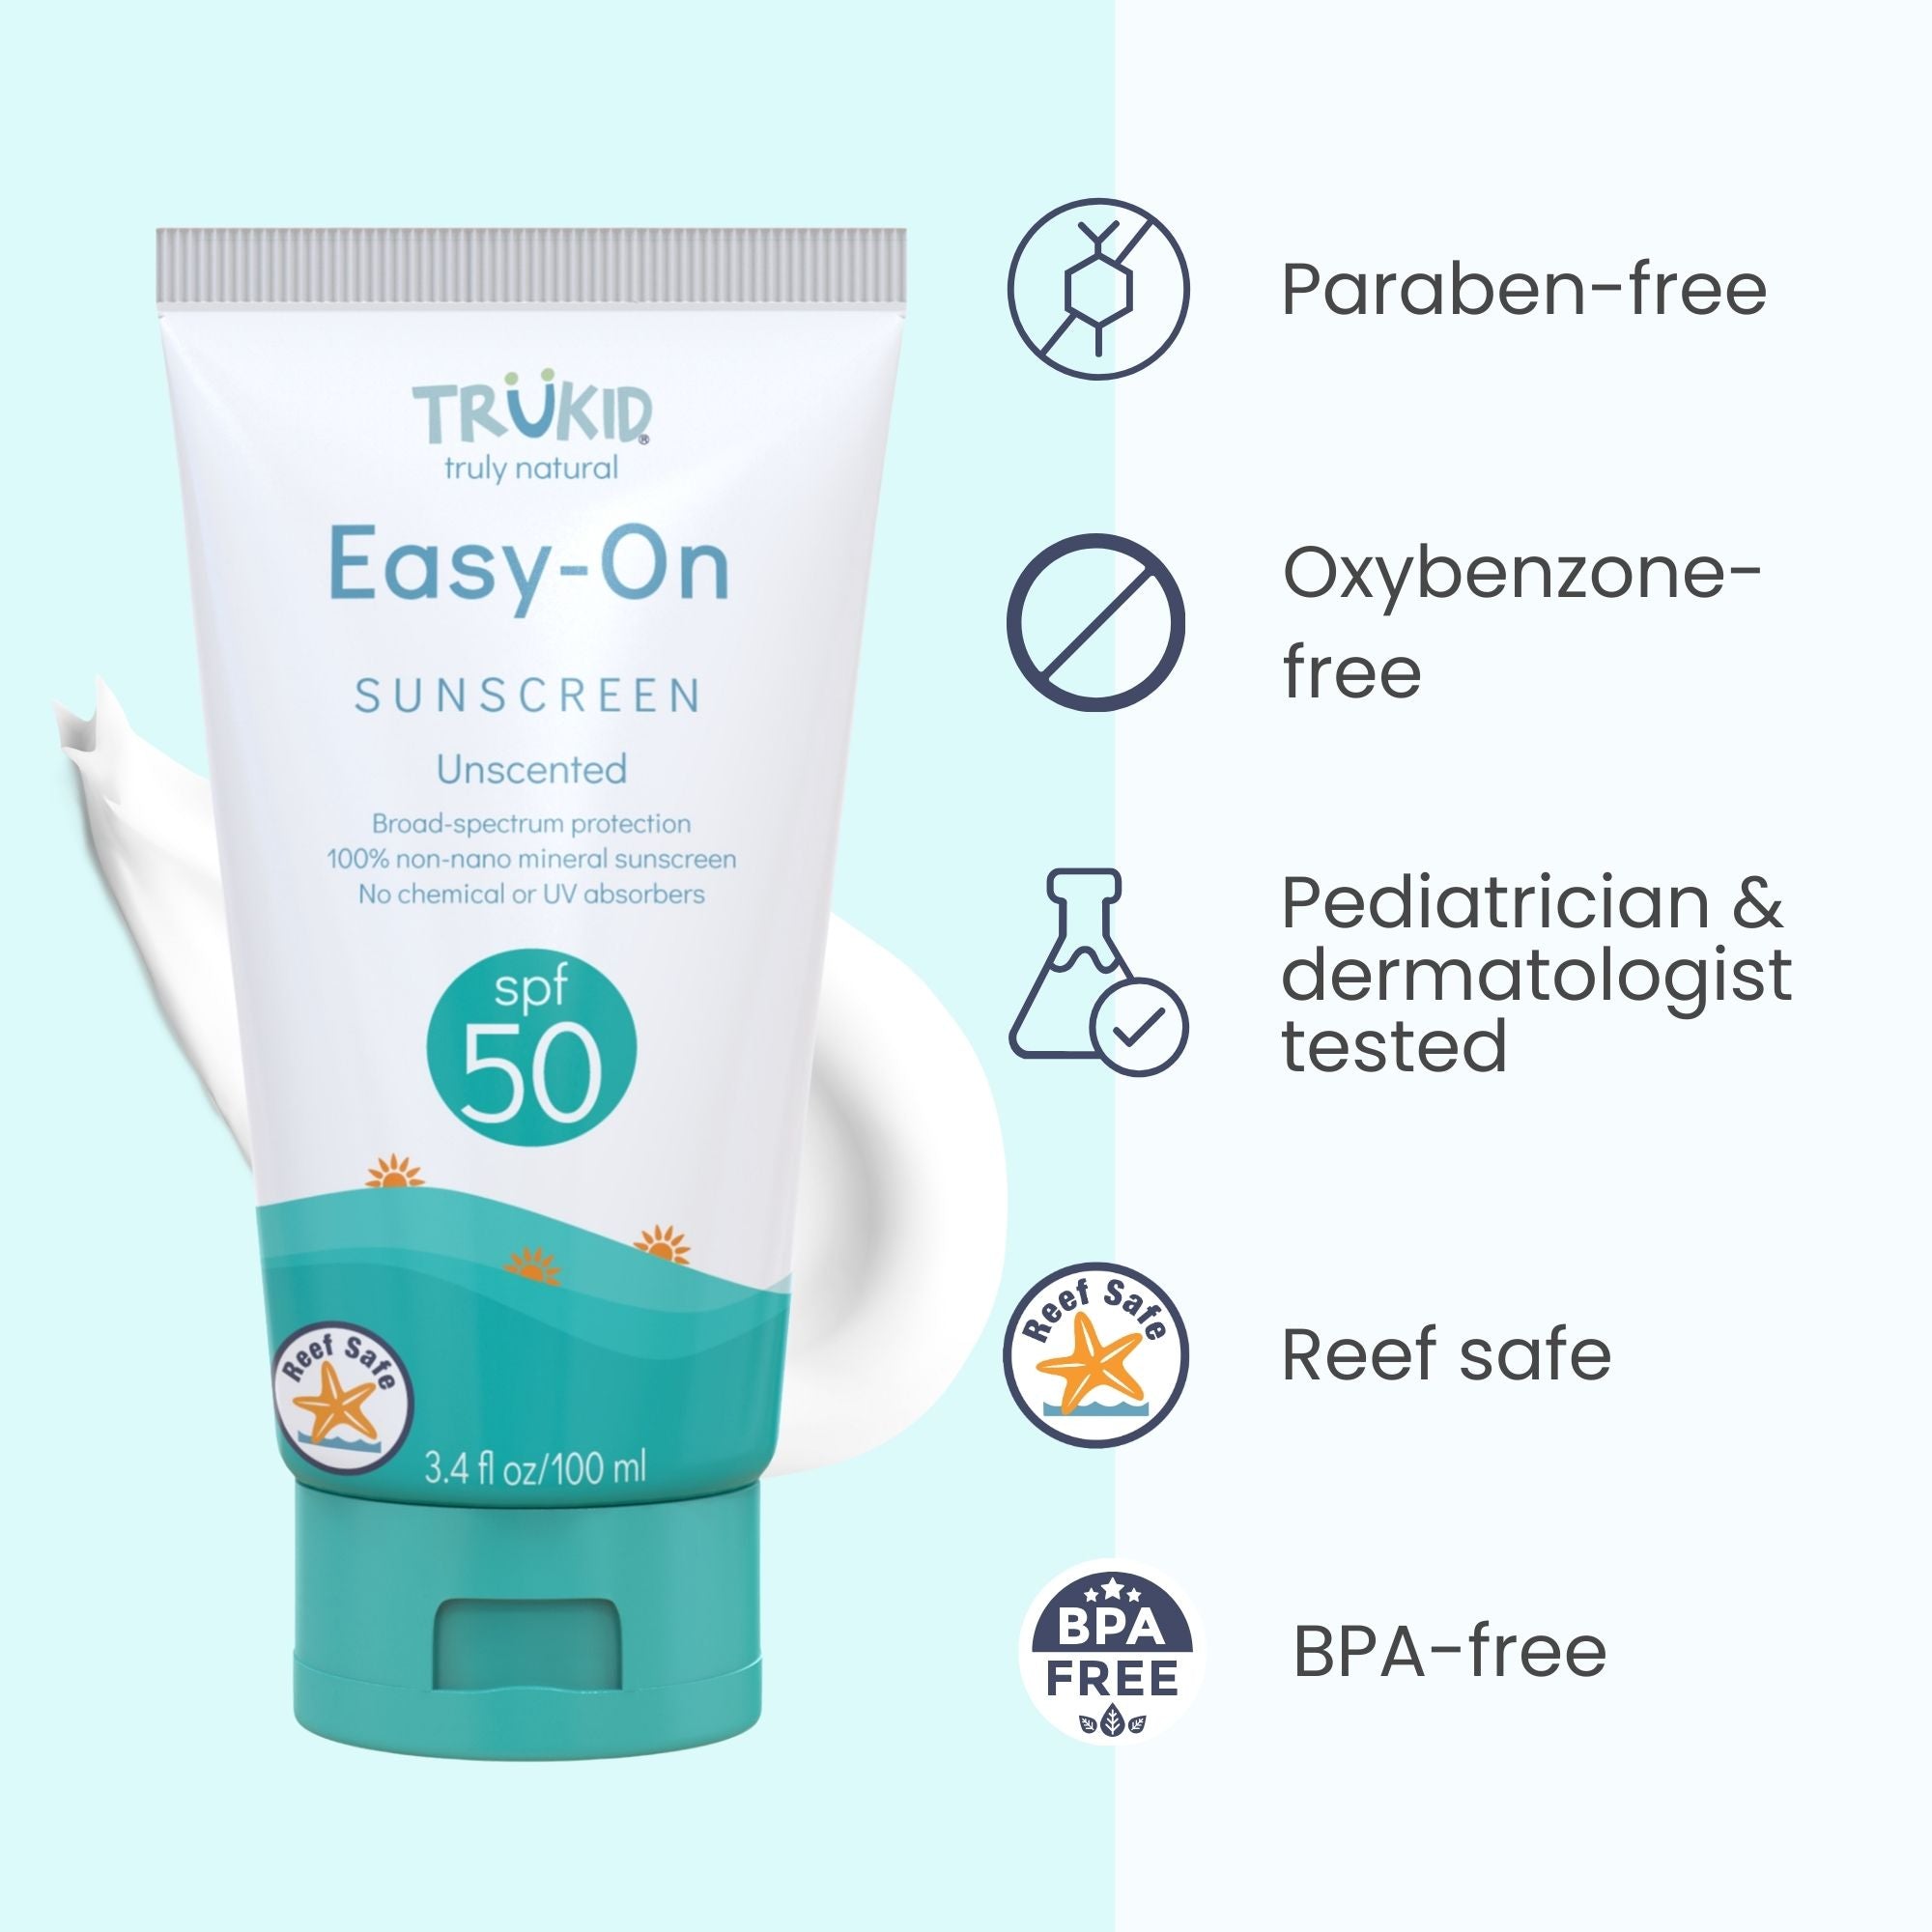 TruKid Easy On SPF 50 Sunscreen  Features